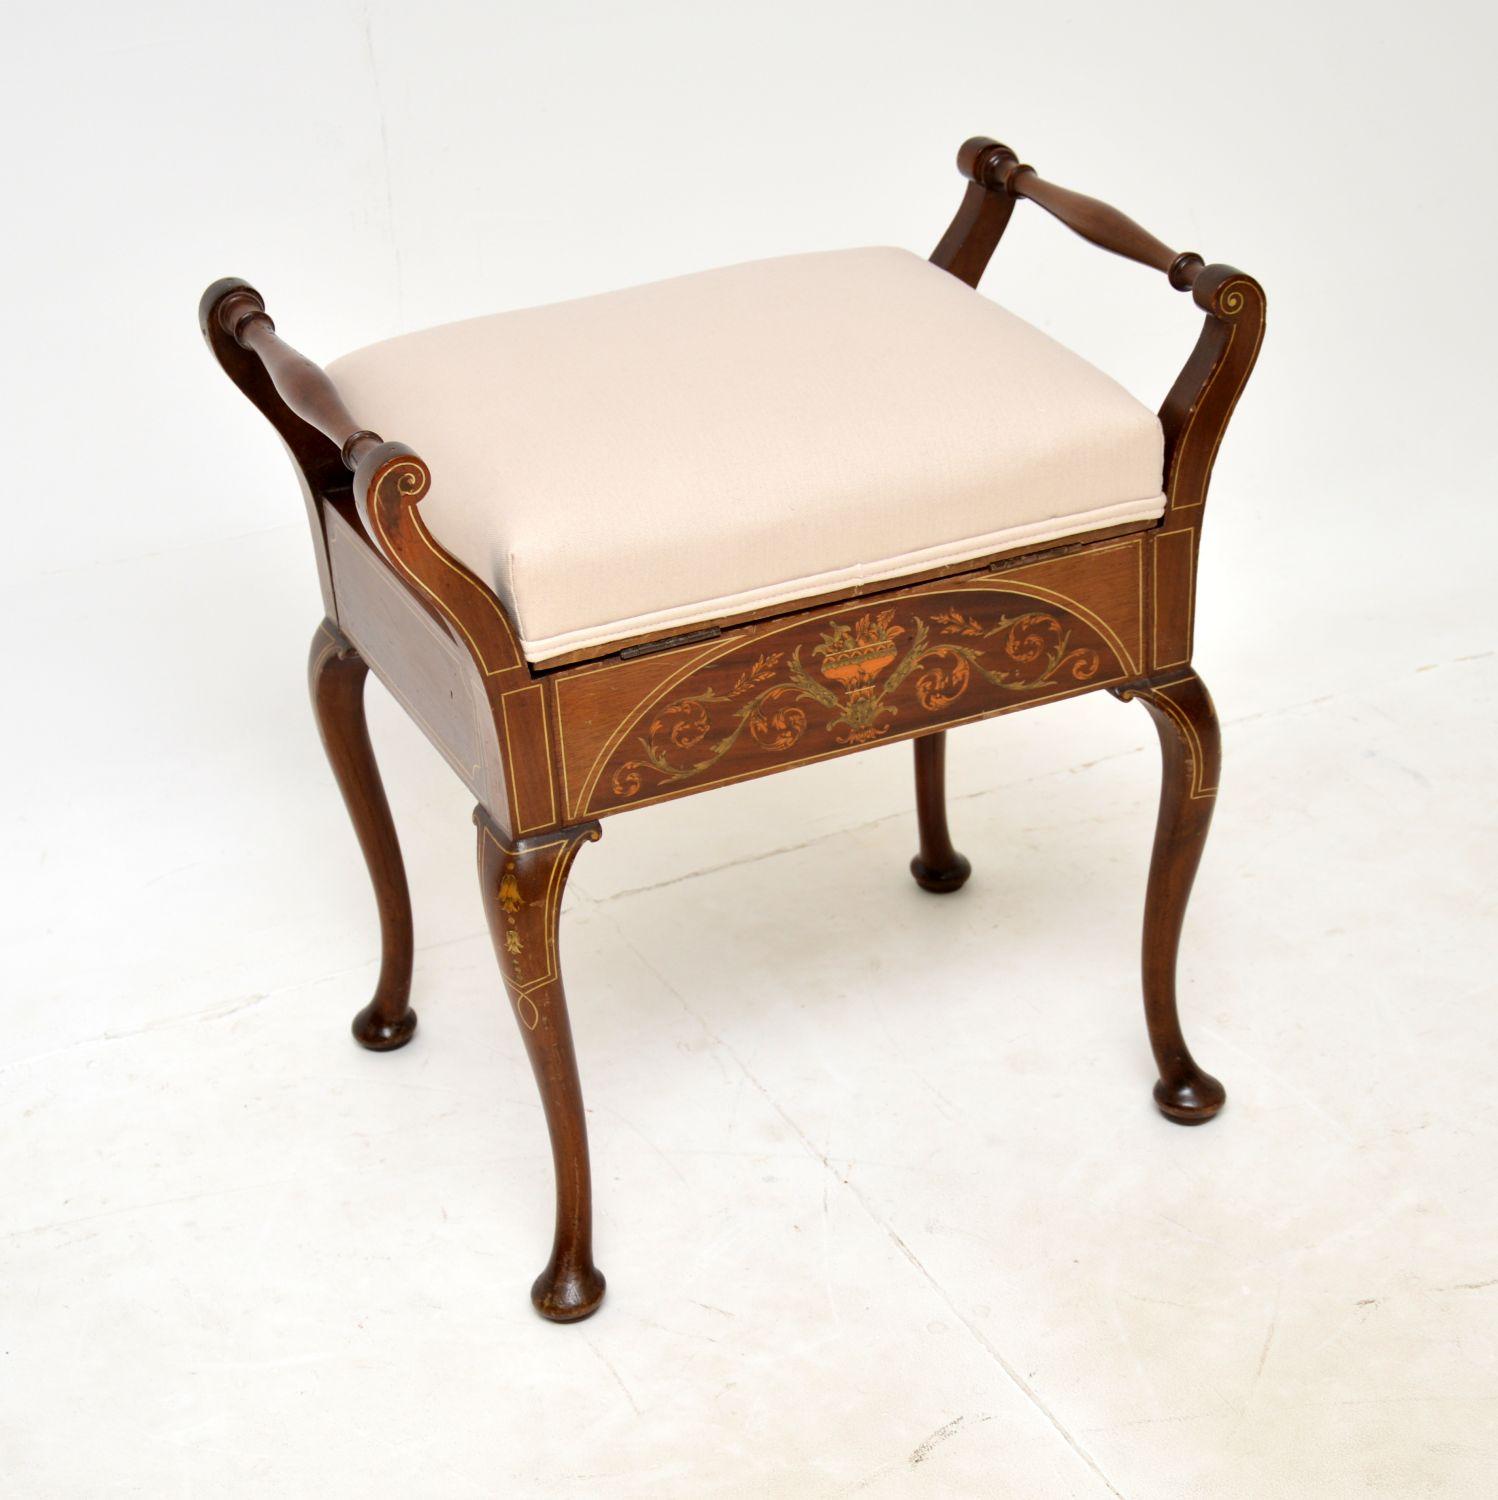 A beautiful original antique Edwardian piano stool. This was made in England, it dates from around the 1890-1900 period.

It is of superb quality, with beautiful inlays on both sides. This sits on cabriole legs, the seat lifts up to reveal storage